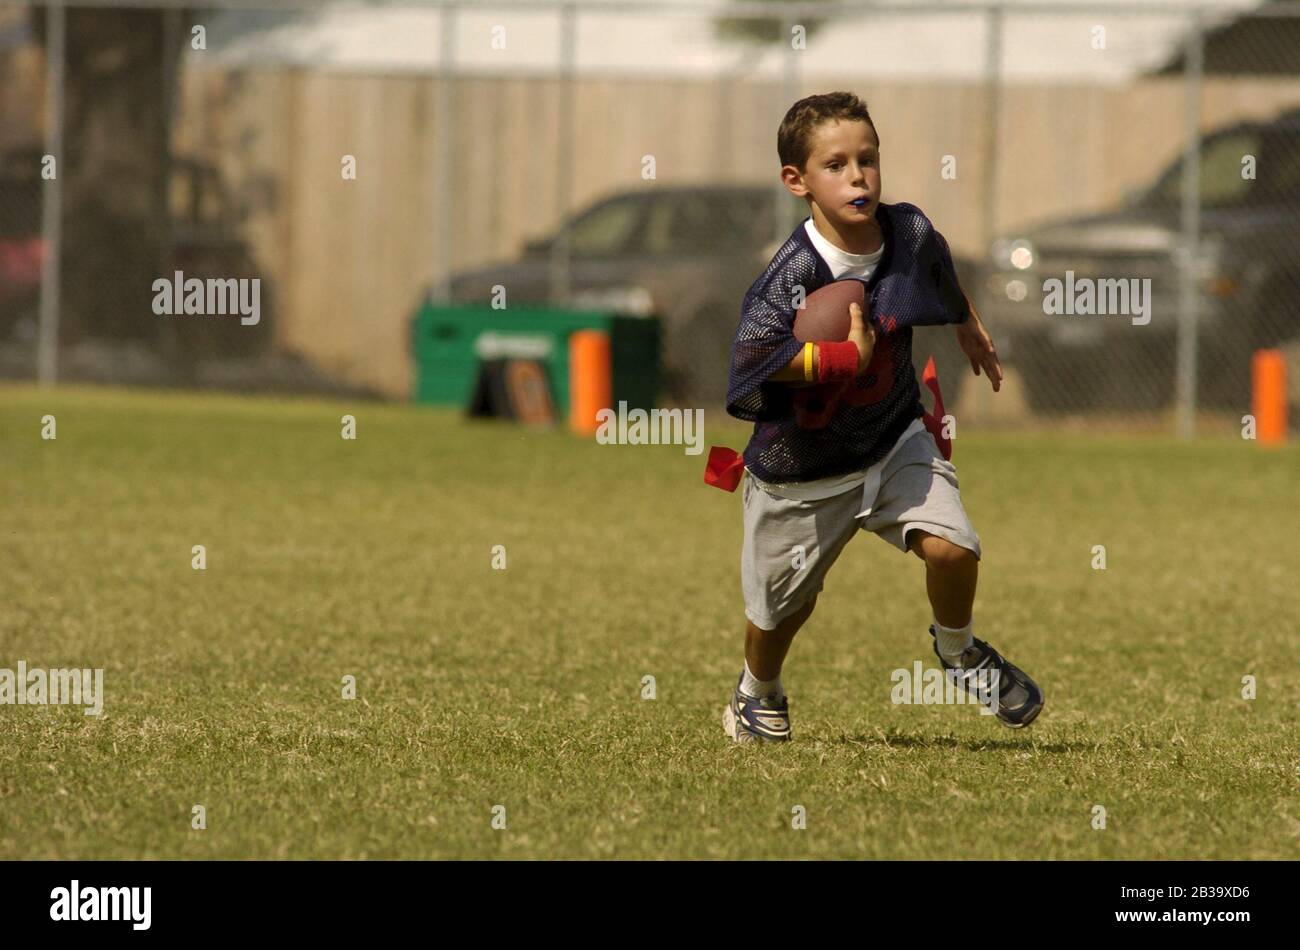 Austin Texas USA, October 2004: Eight-year-old boy wearing a plastic mouth guard runs downfield during a youth league flag football game. ©Bob Daemmrich Stock Photo